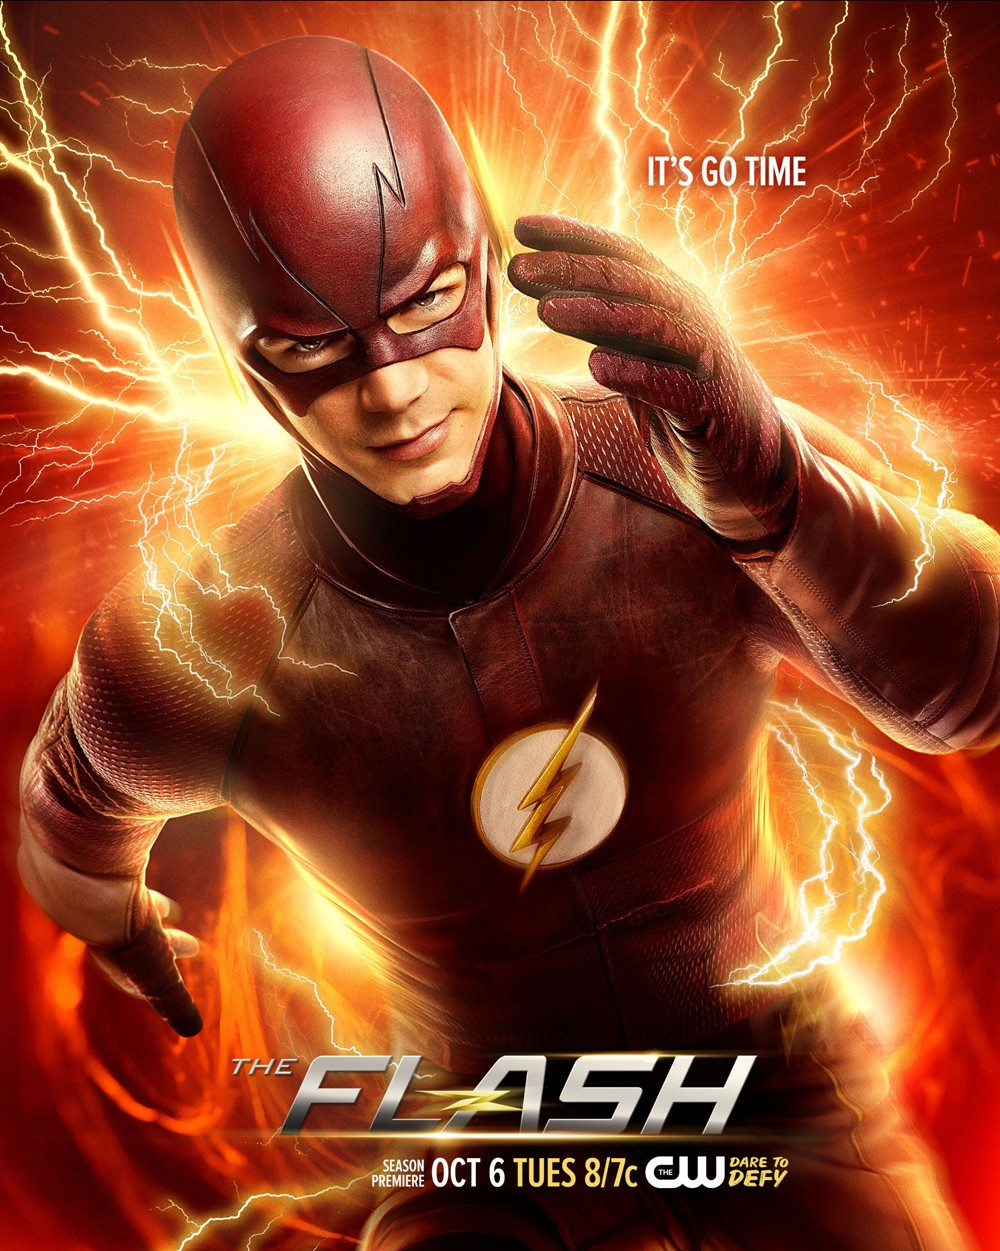 Imagen - The Flash season 2 poster - It's Go Time.png | The Flash